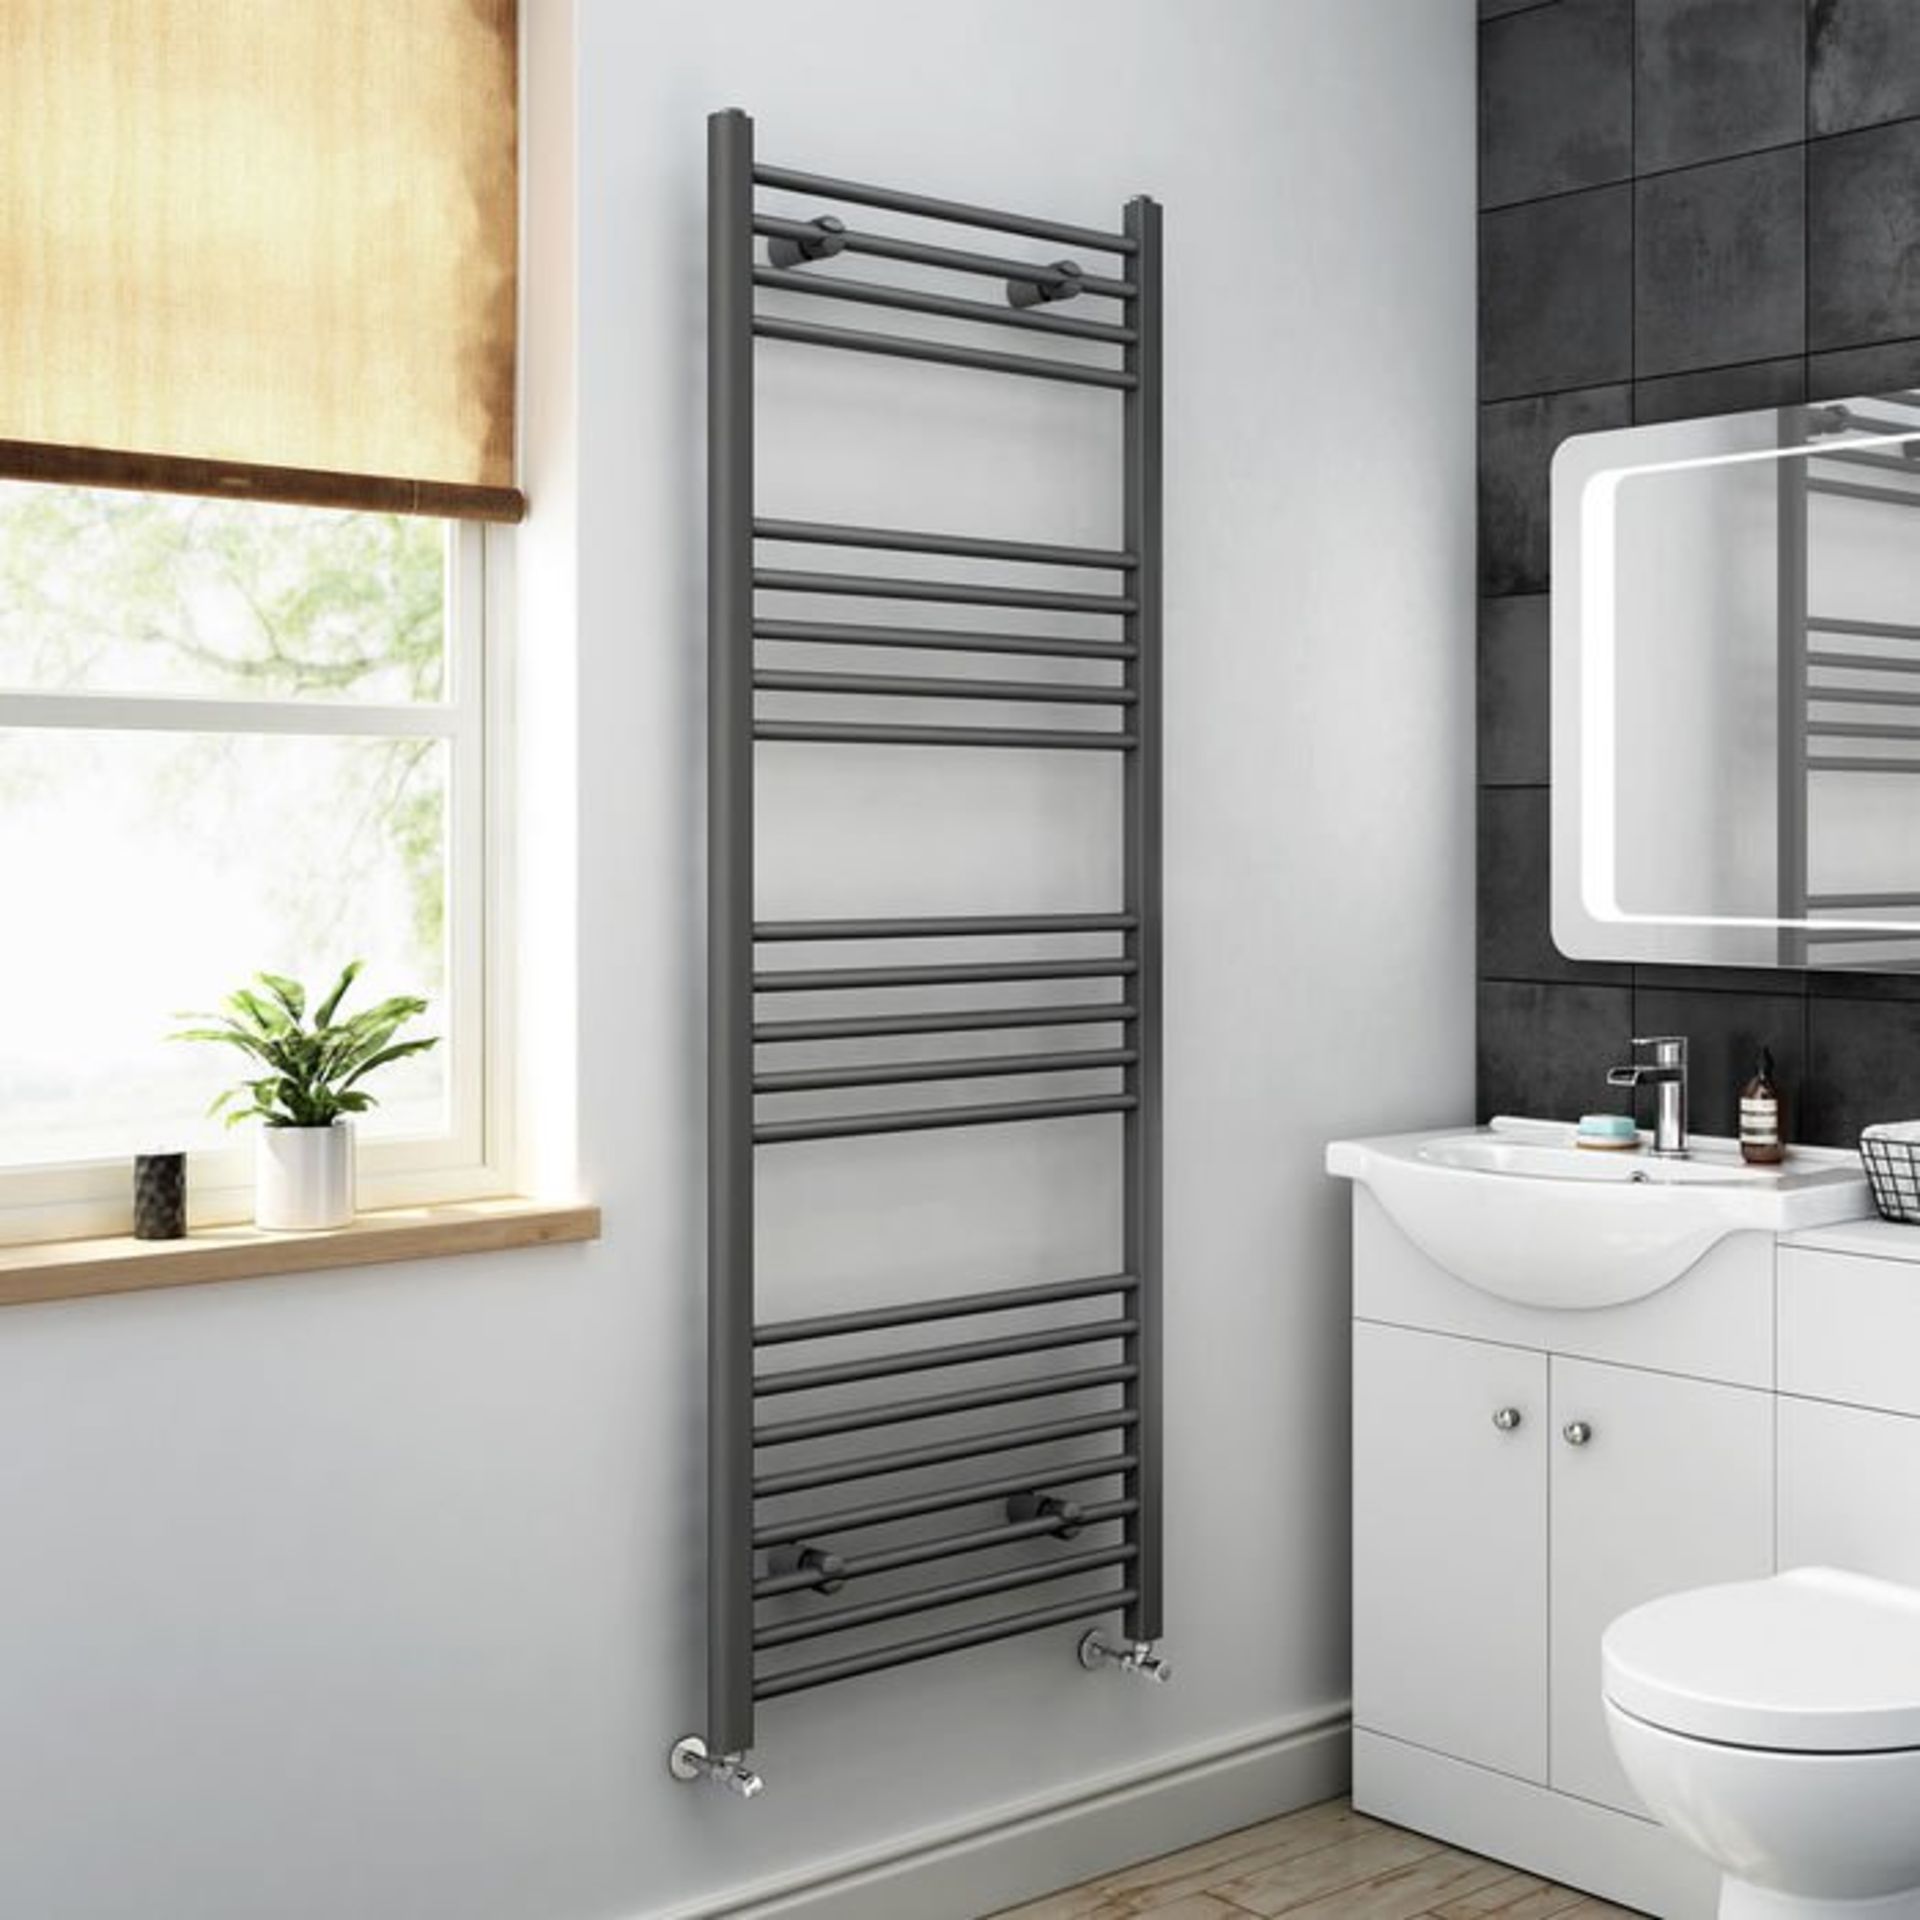 (H102) 1600x600mm - 20mm Tubes - Anthracite Heated Straight Rail Ladder Towel Radiator . Corrosion